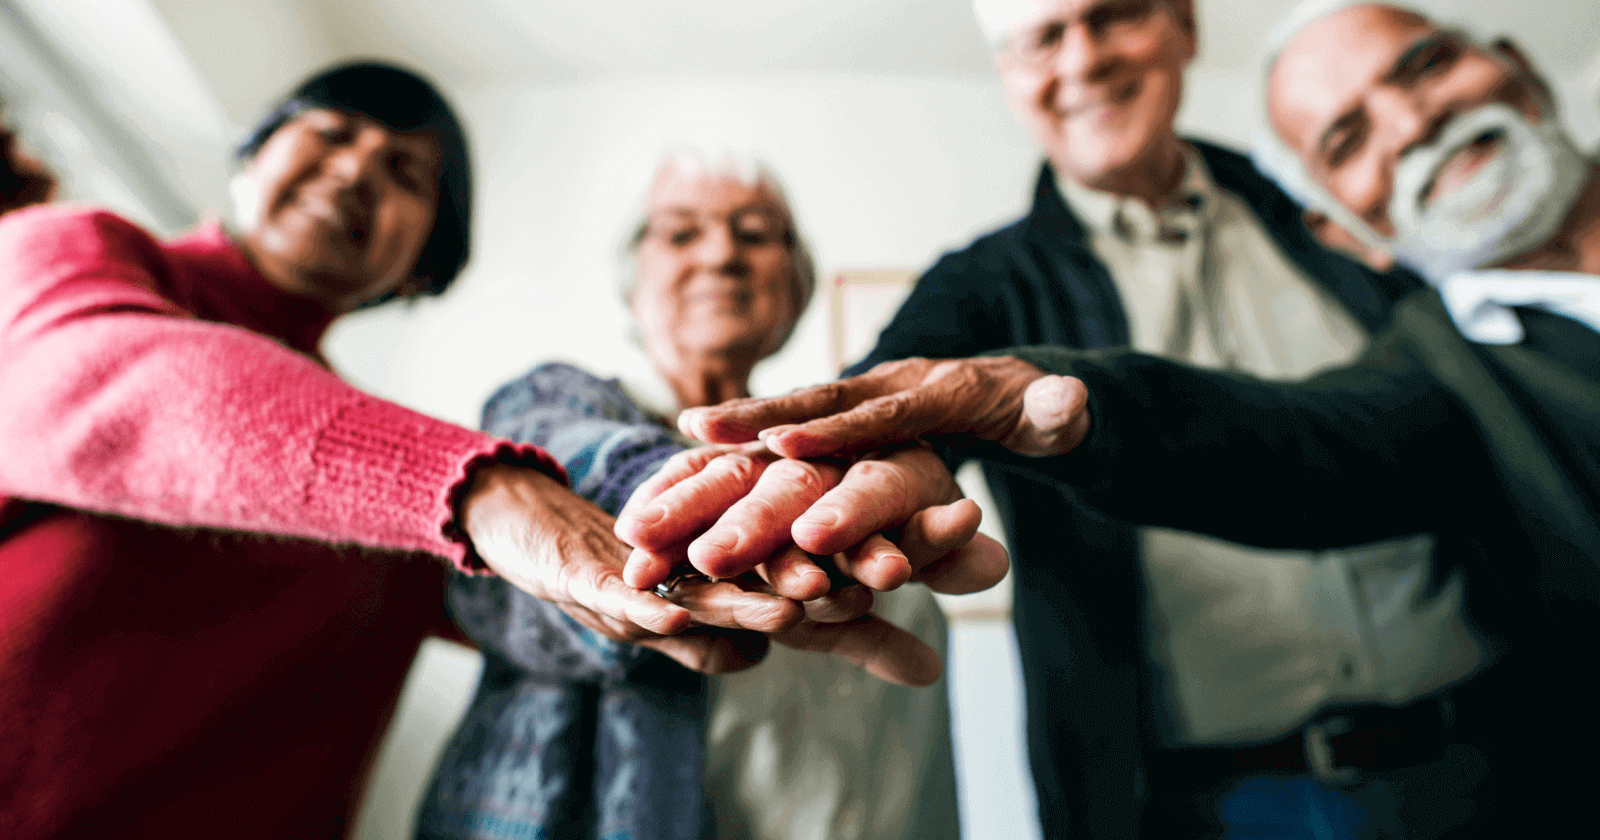 The importance of socialization and community for seniors
